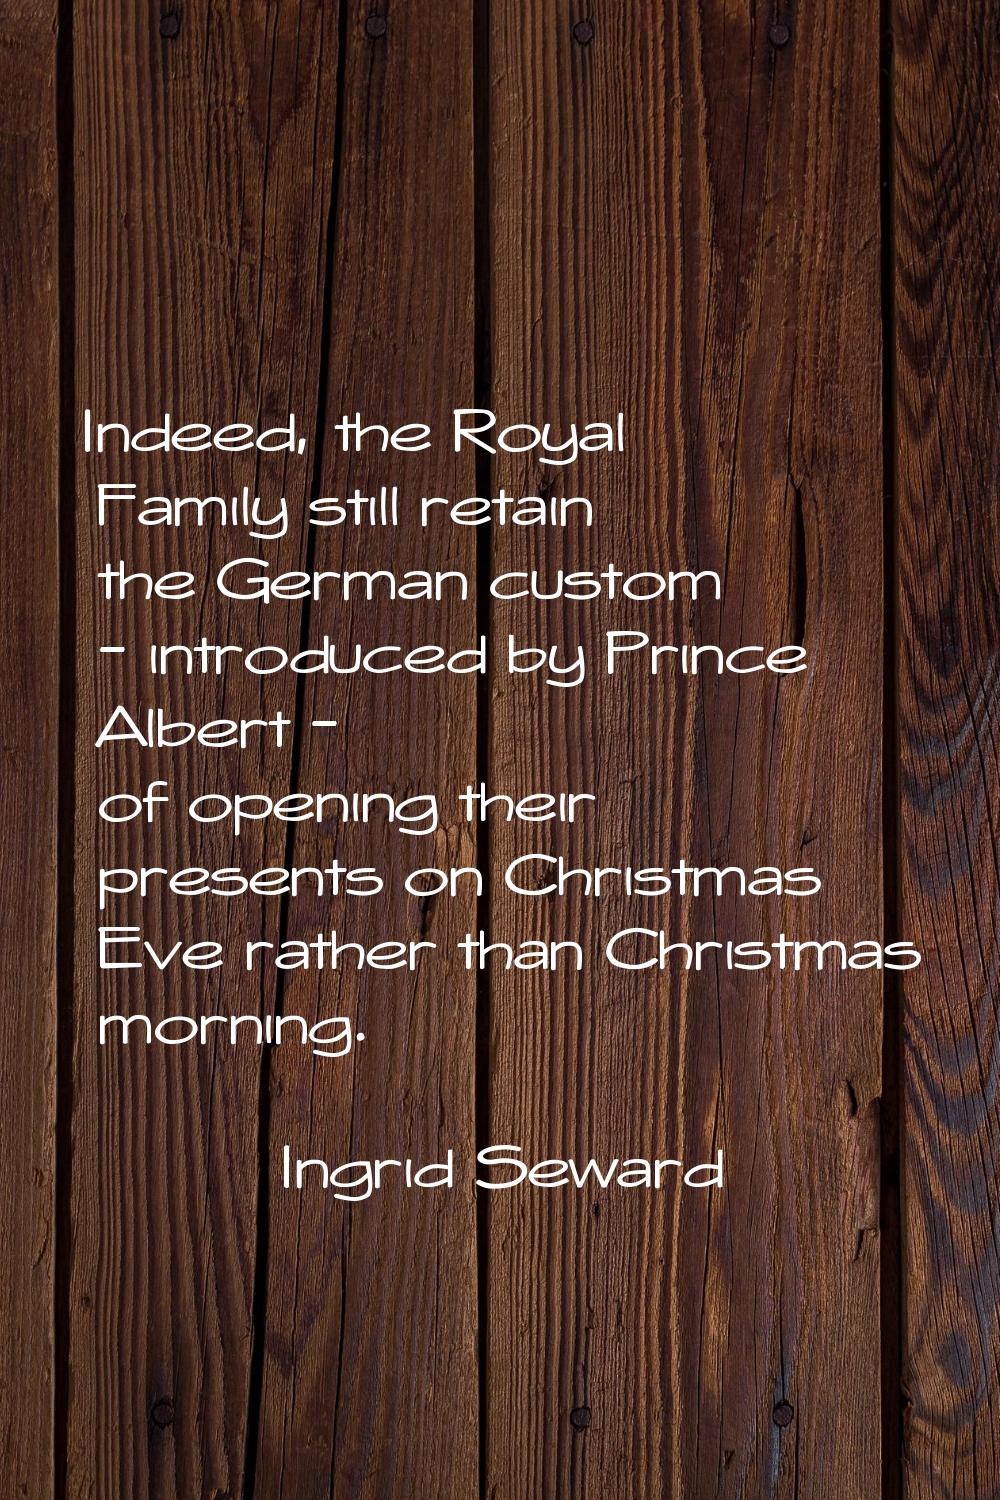 Indeed, the Royal Family still retain the German custom - introduced by Prince Albert - of opening 